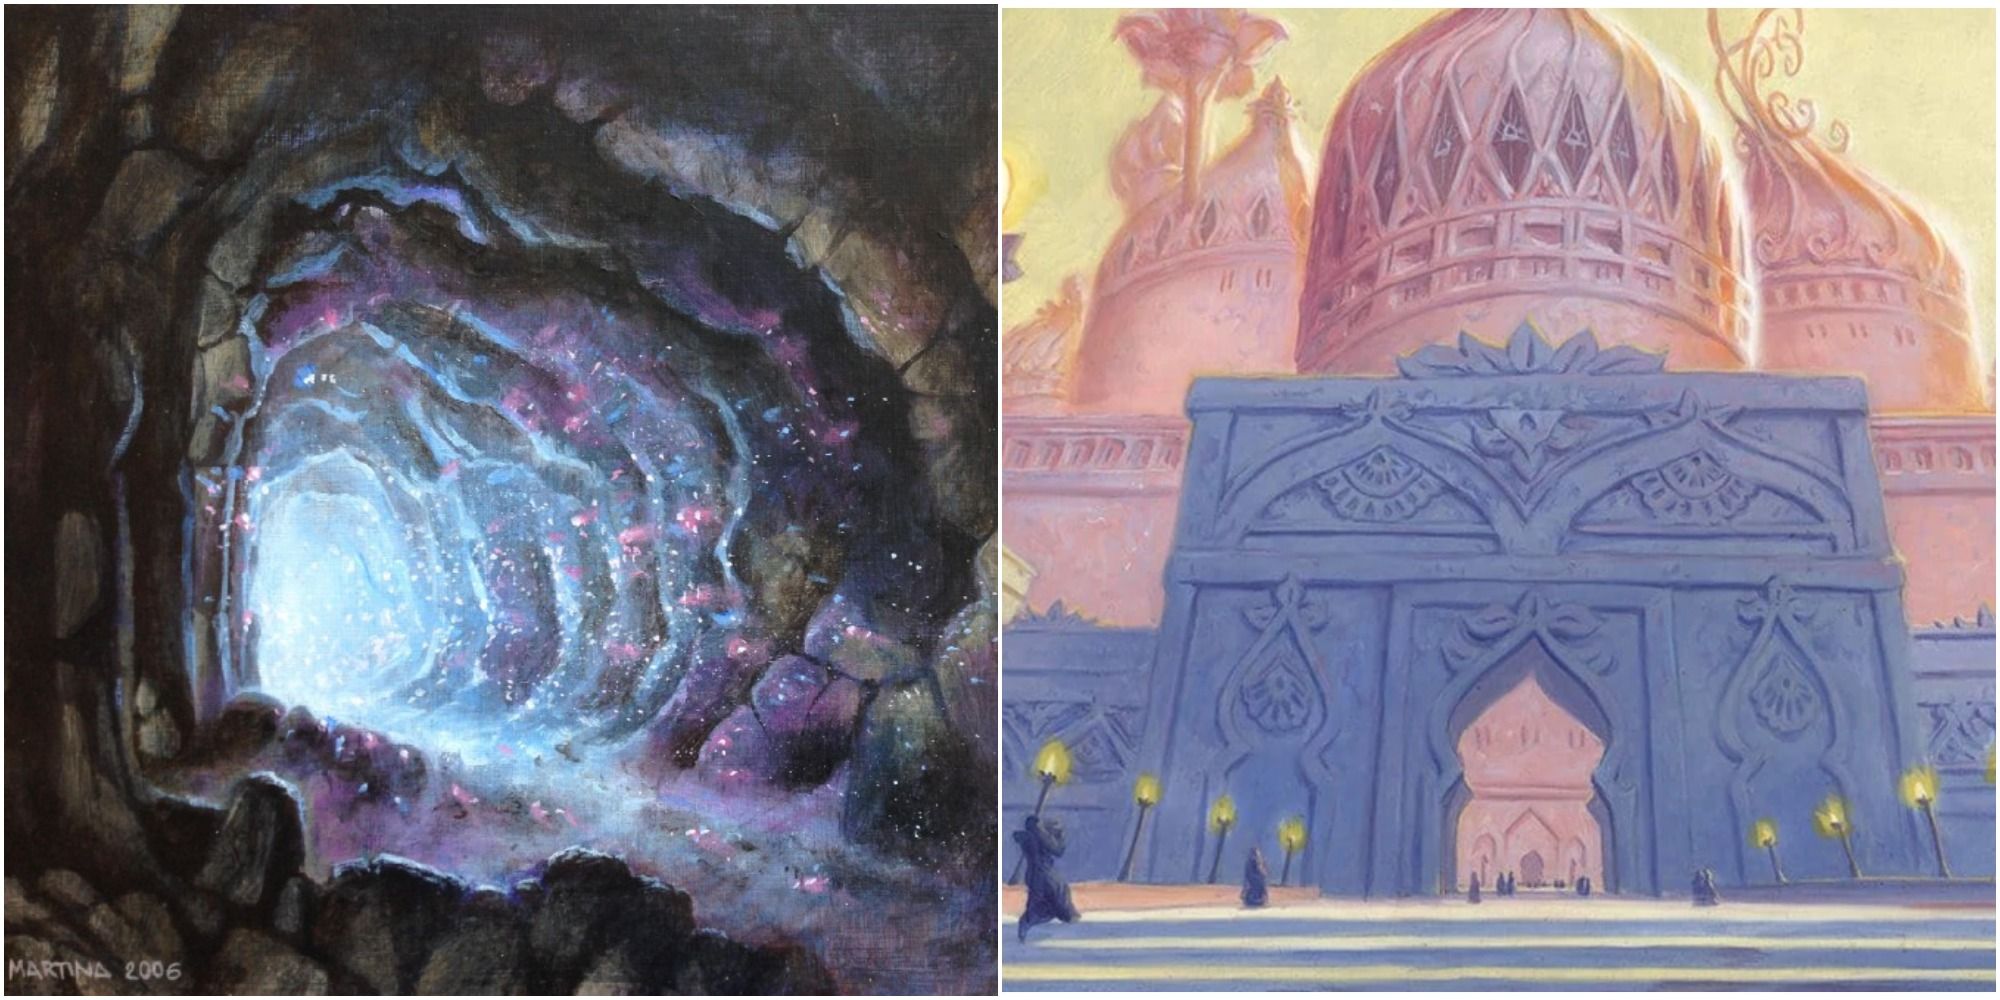 Gemstone Caverns by Martina Pilcerova and City of Traitors by Ralph Horsley